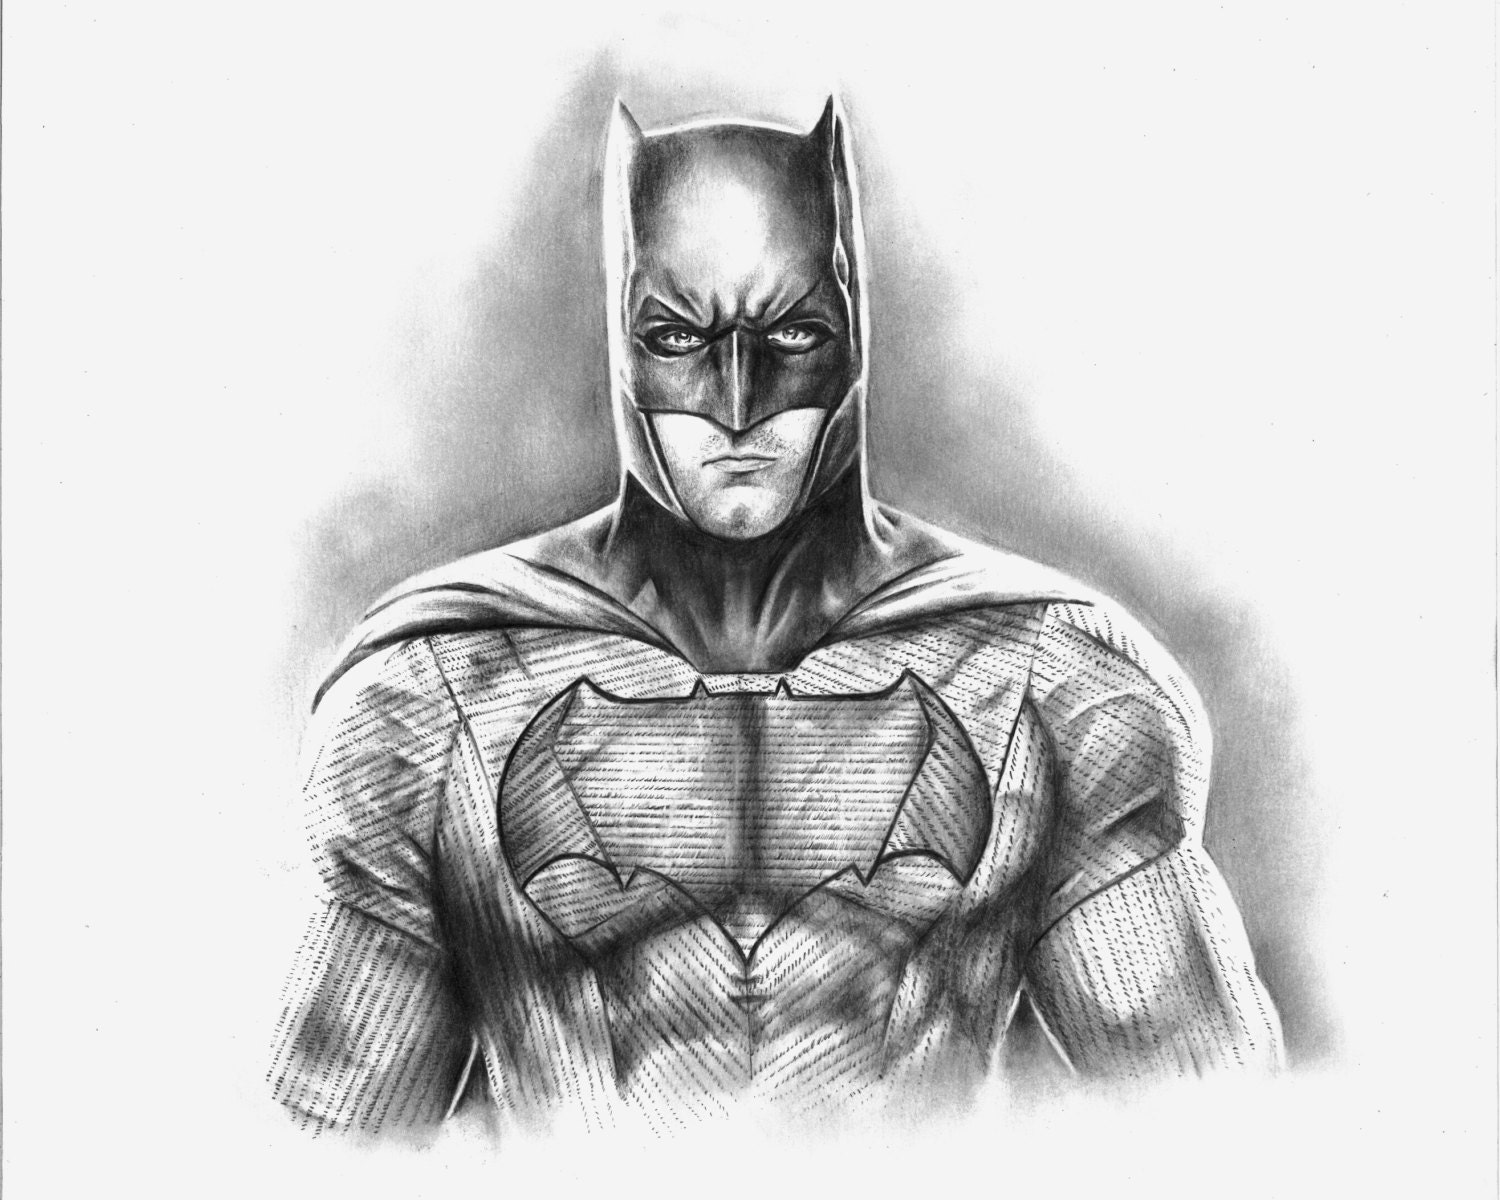 How To Draw Batman Step by Step - [6 Easy Phase] & [Video]